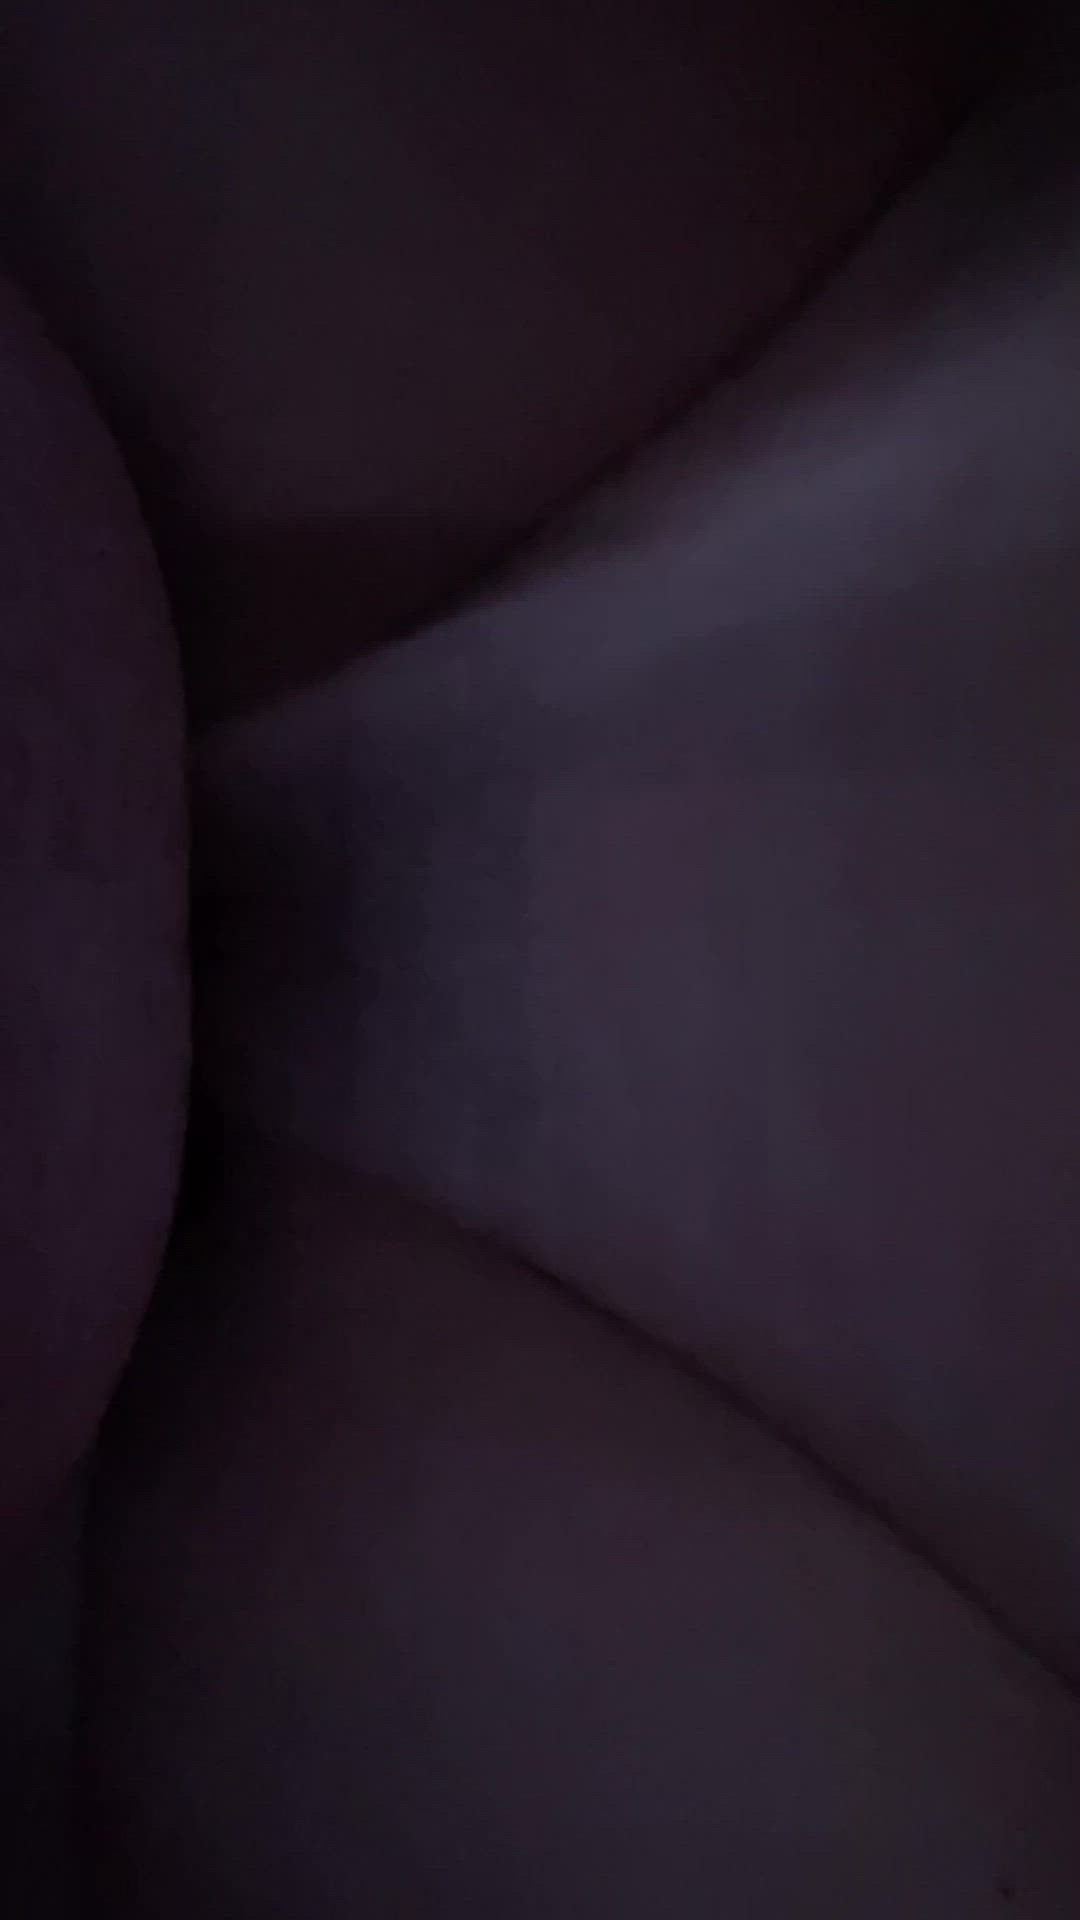 Amateur porn video with onlyfans model cheeriehoe <strong>@cheeriehoe</strong>